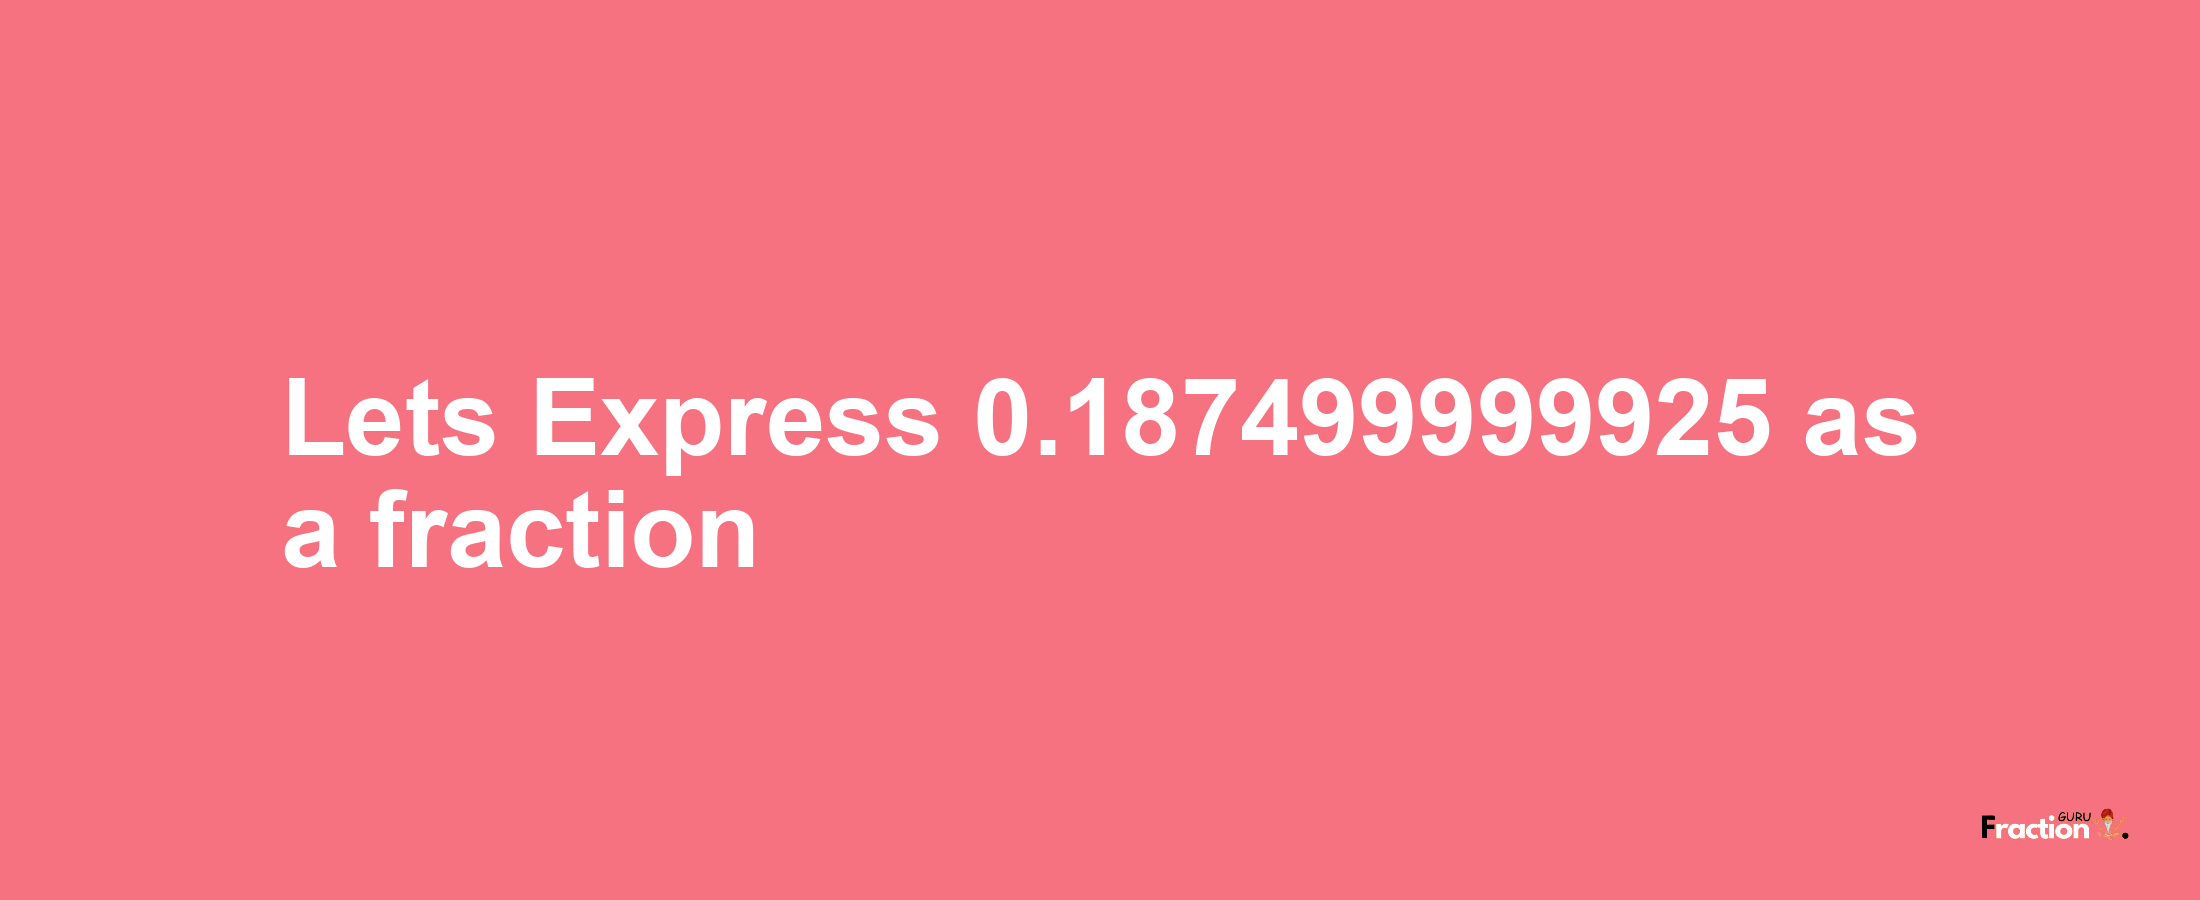 Lets Express 0.187499999925 as afraction